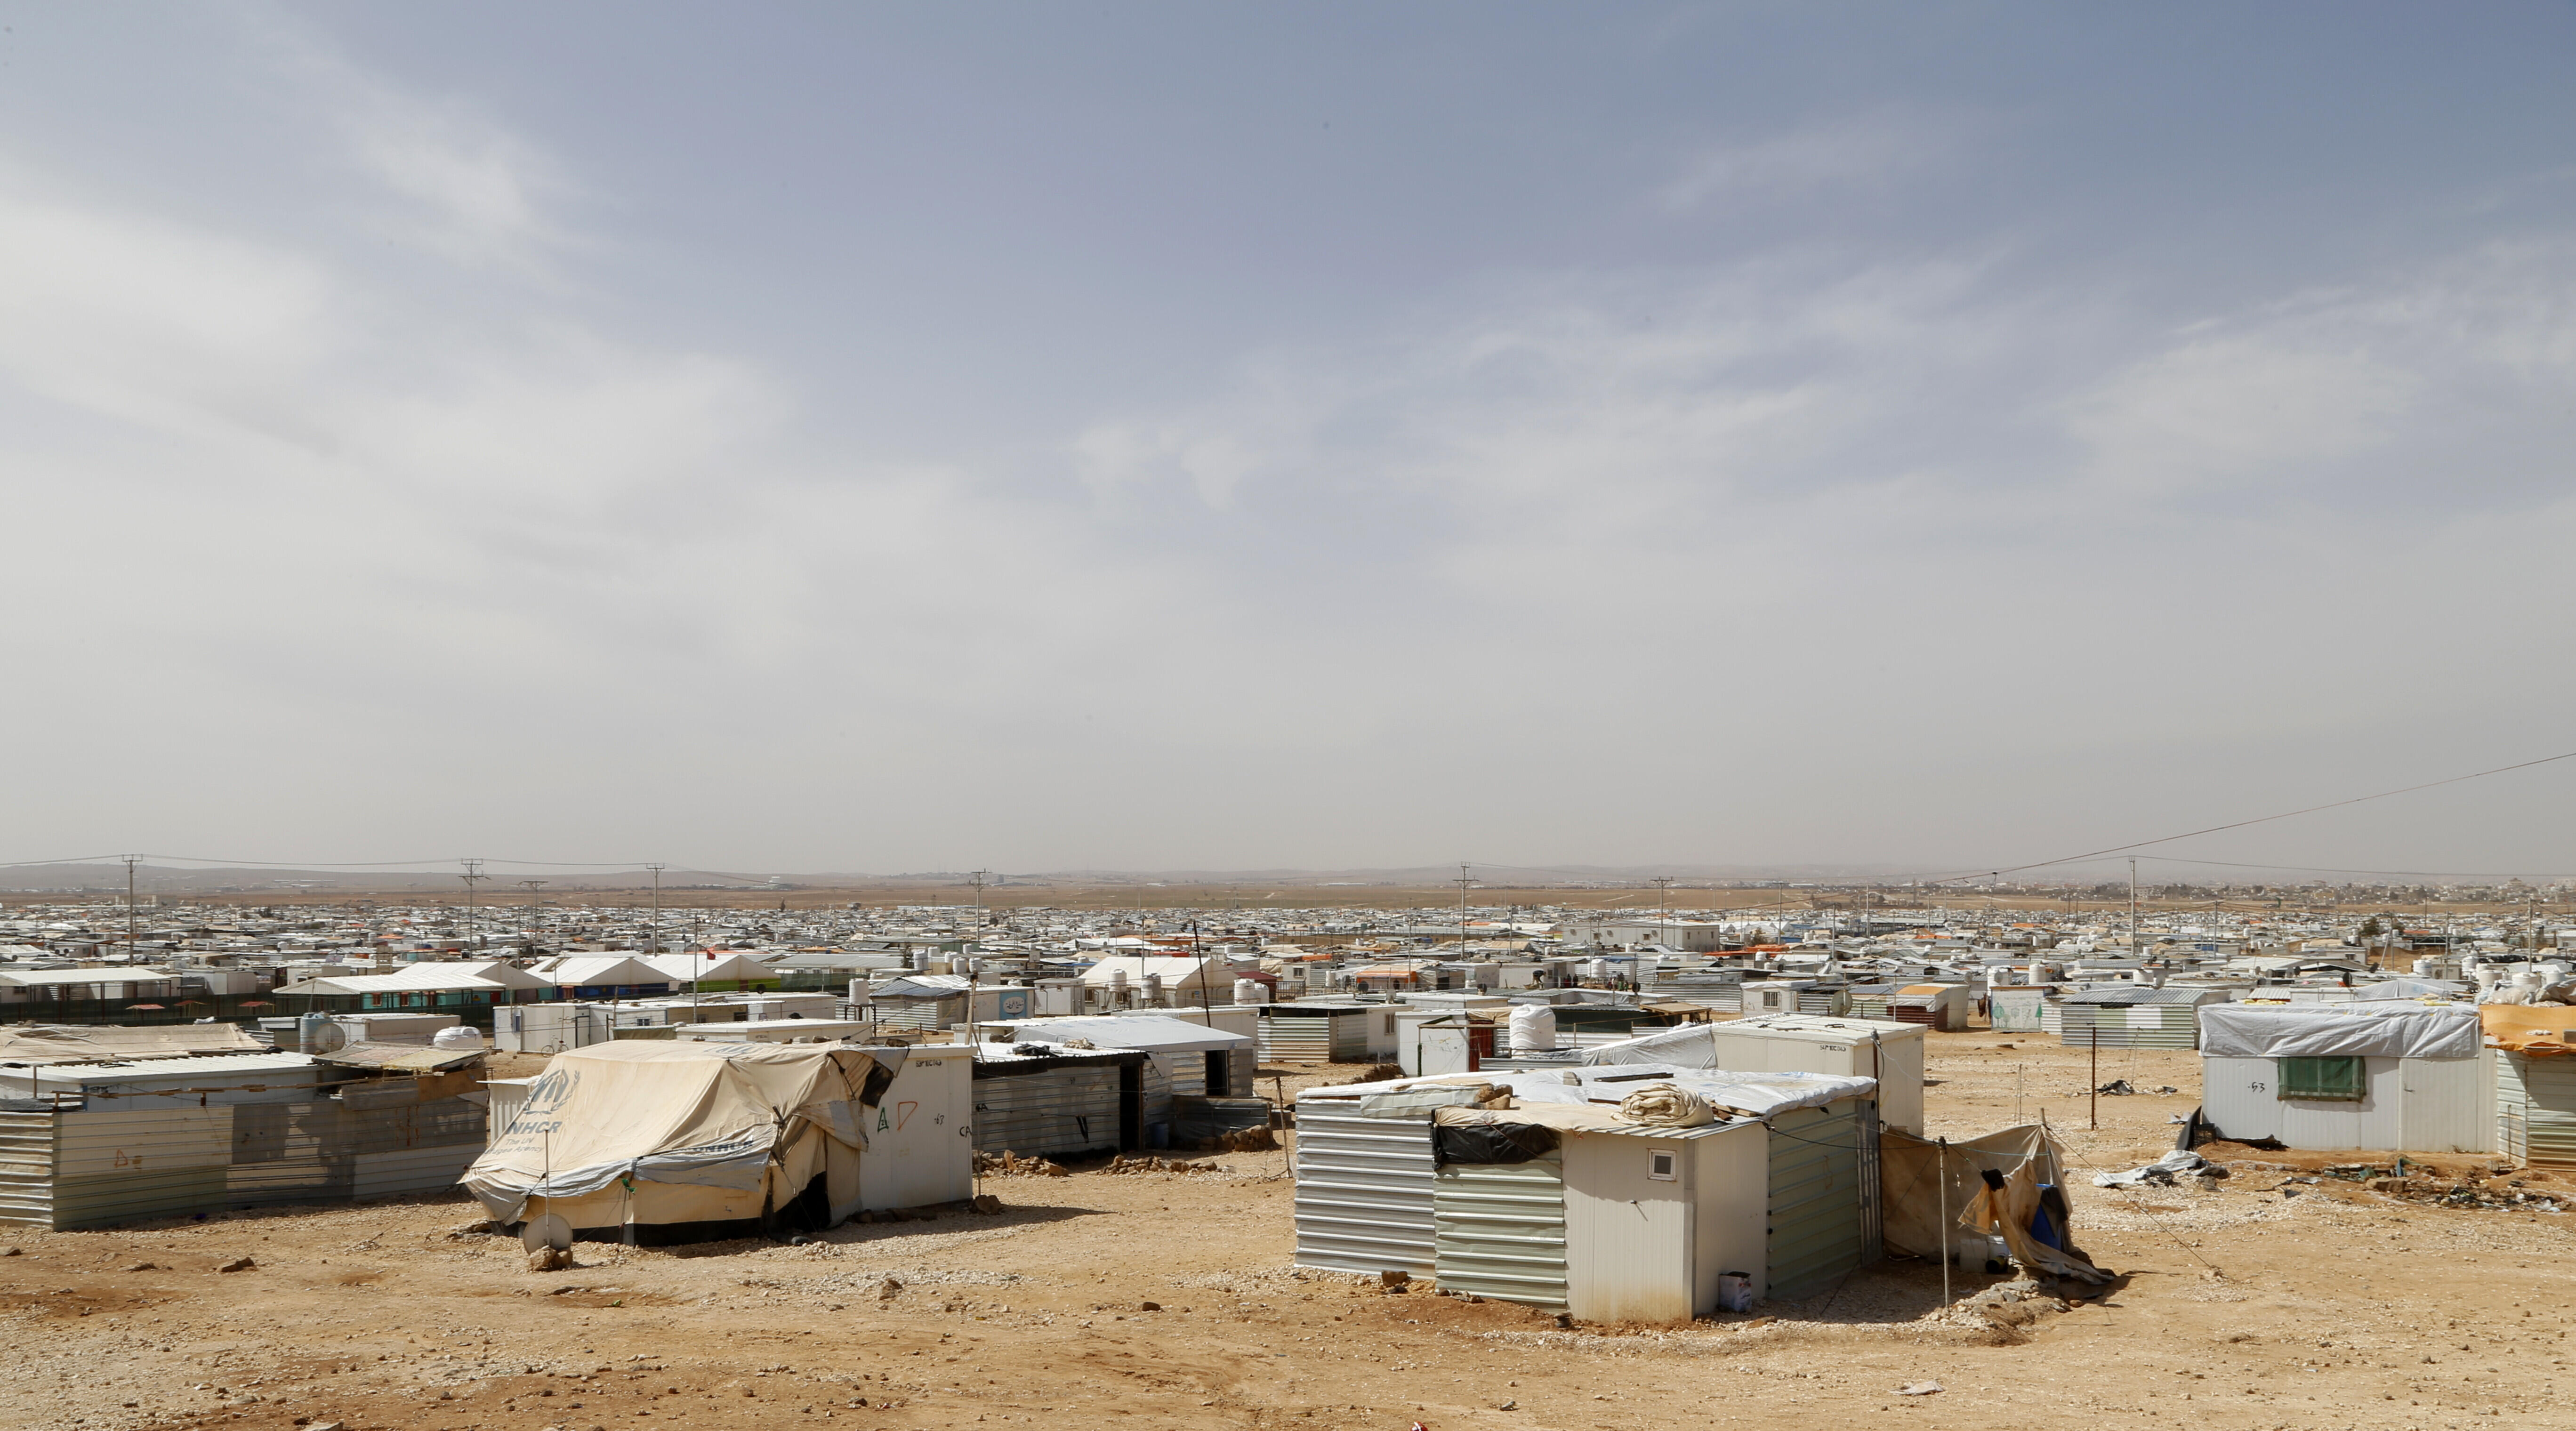 Zaatari refugee camp. The photo consists of many small tin houses on a flat desert landscape. 